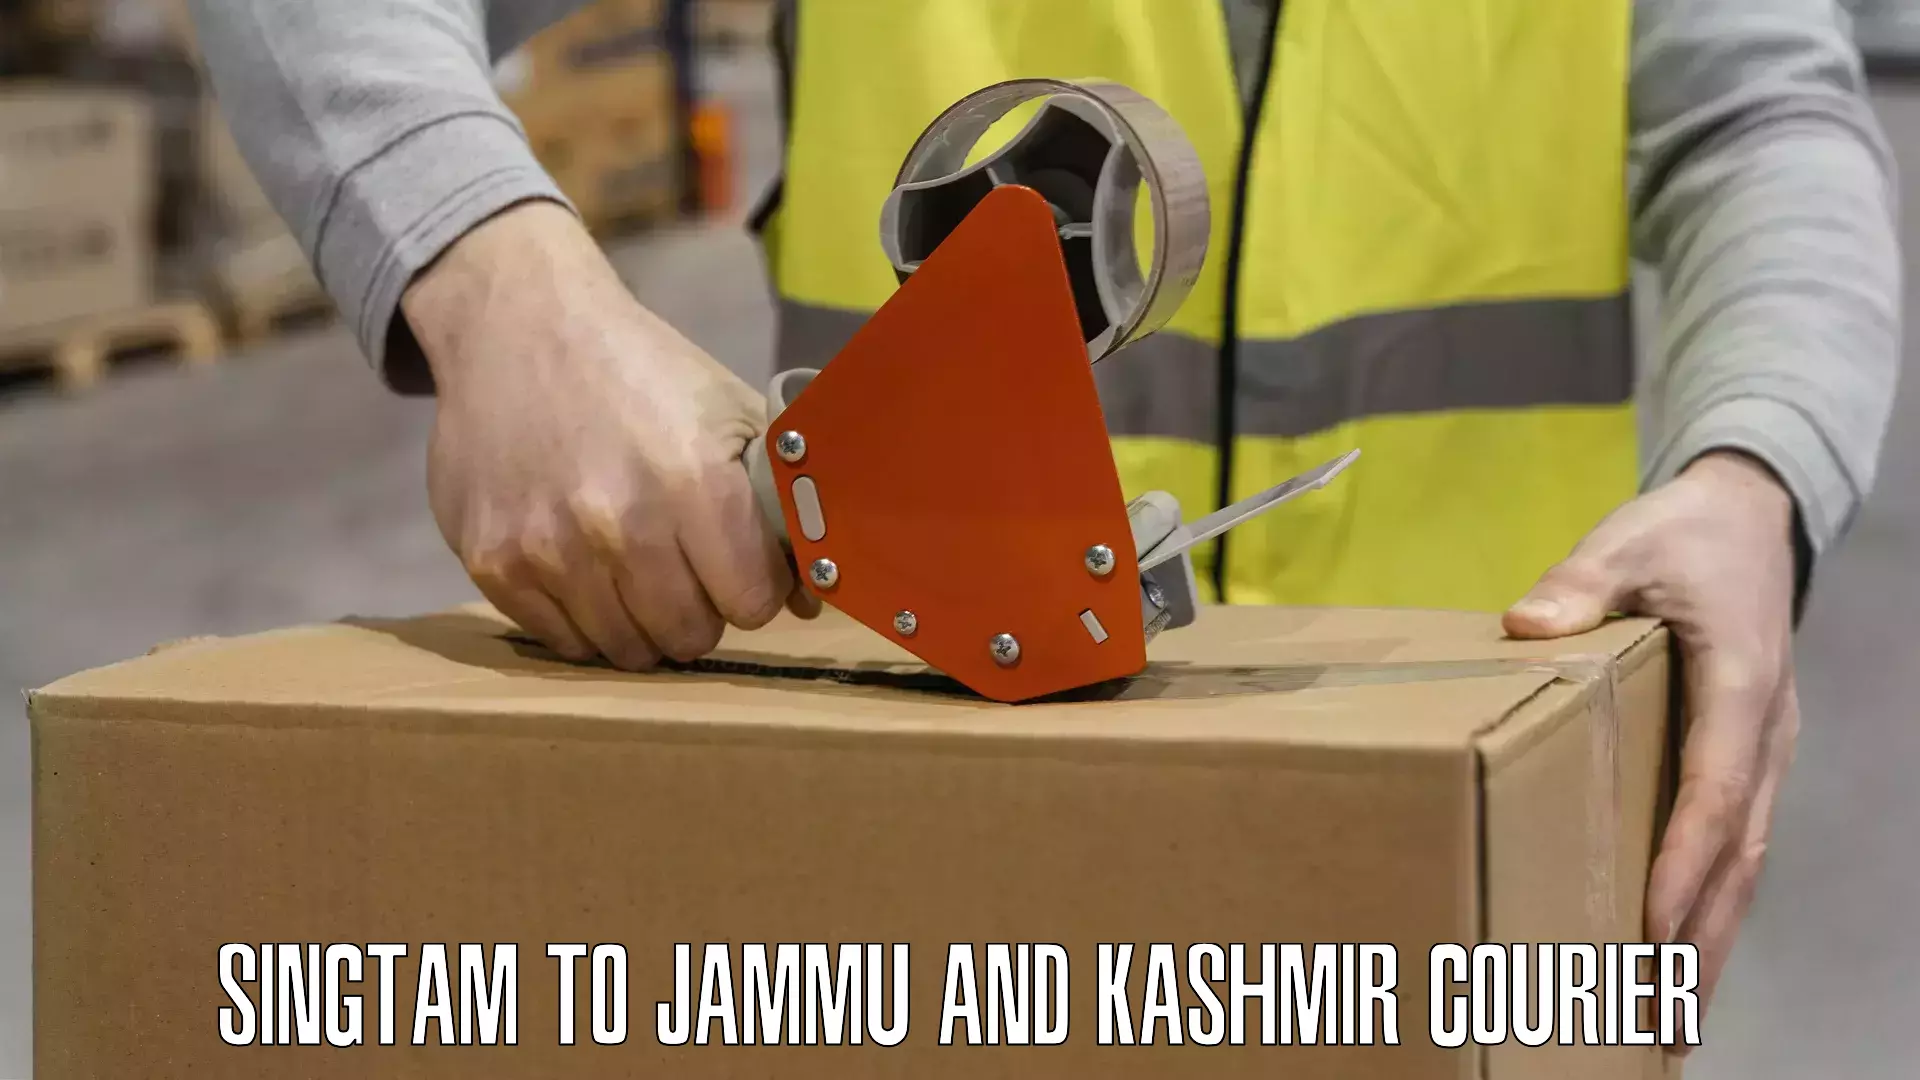 Cost-effective shipping solutions Singtam to Jammu and Kashmir